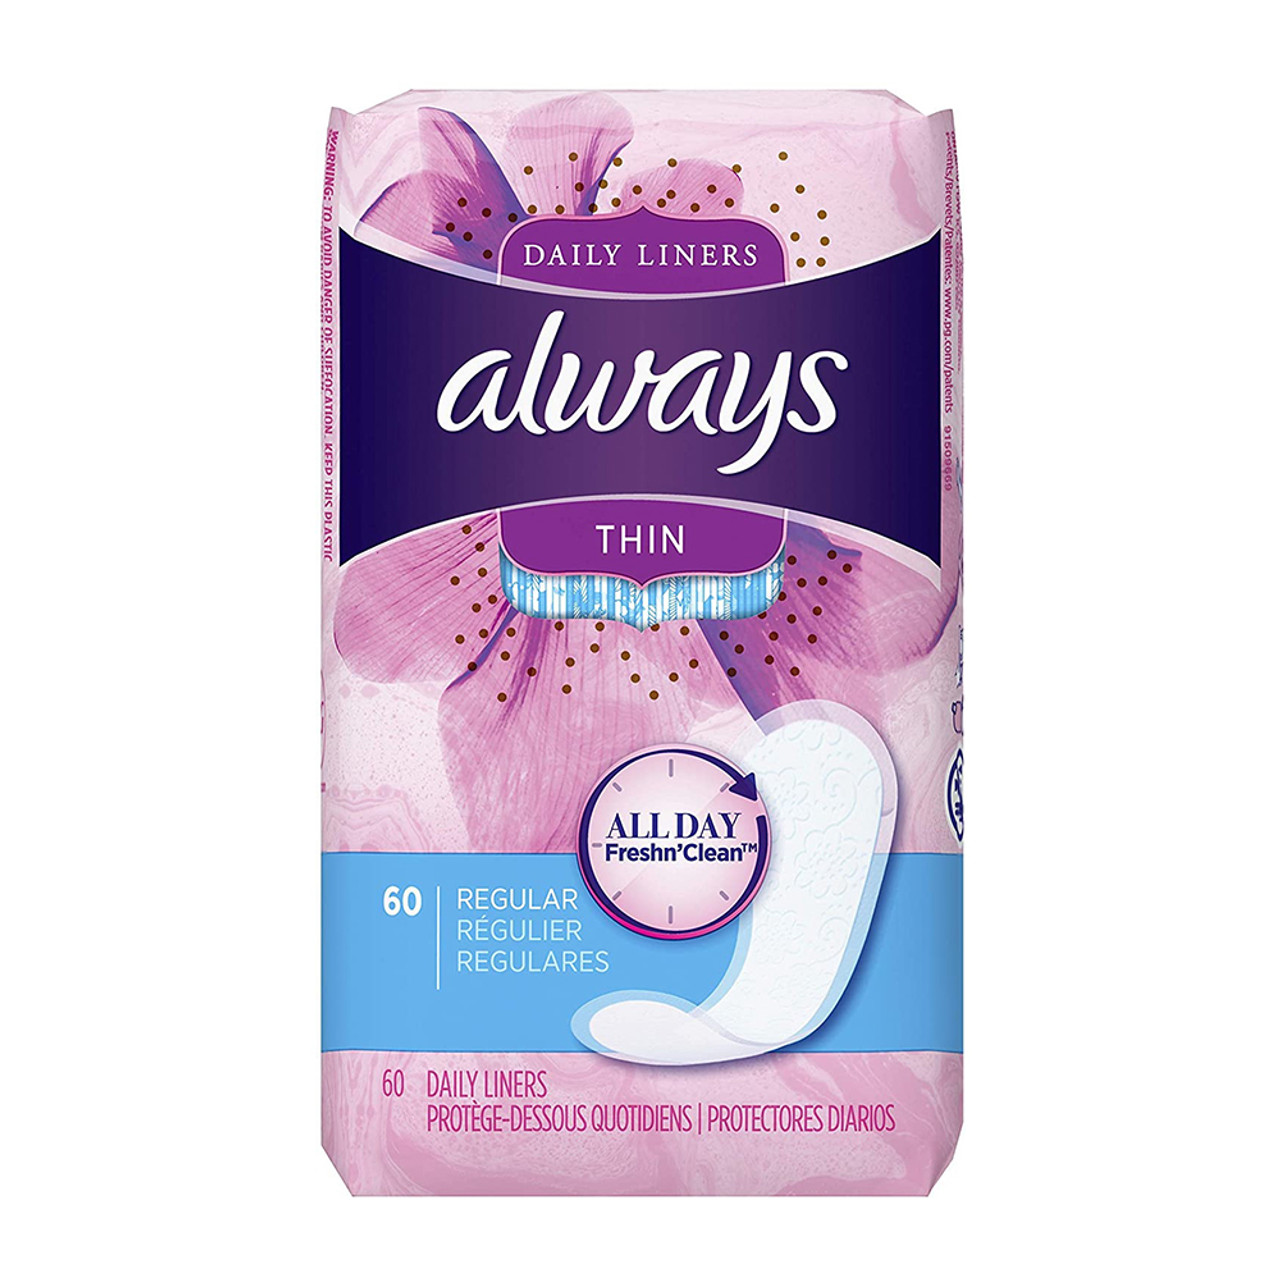 Daily Ultra Thin Incontinence Panty Liners, Very Light Flow, Long